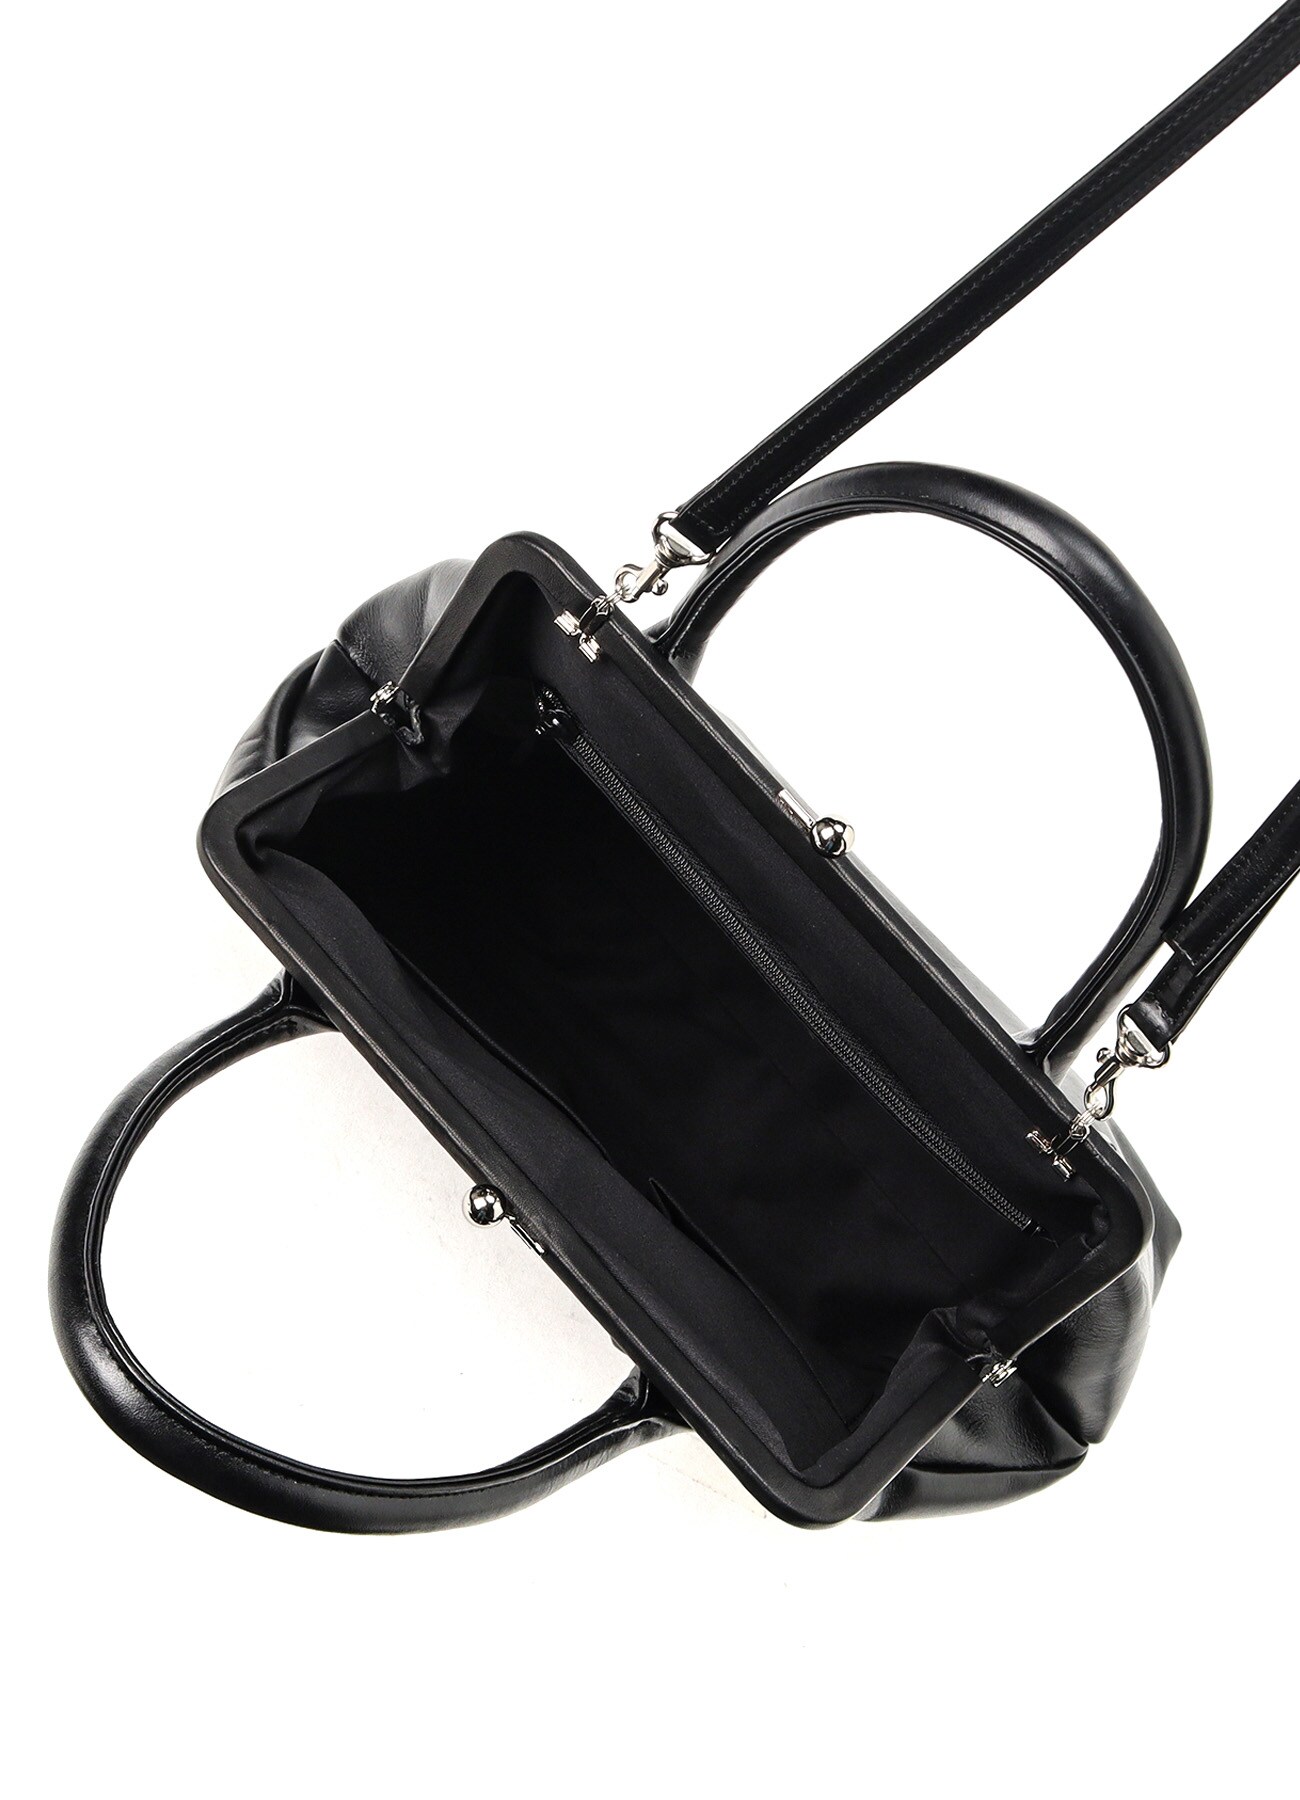 【7/26 12:00(JTS) Release】SEMI-GLOSS LEATHER3D BIG BAG W/ CLASP